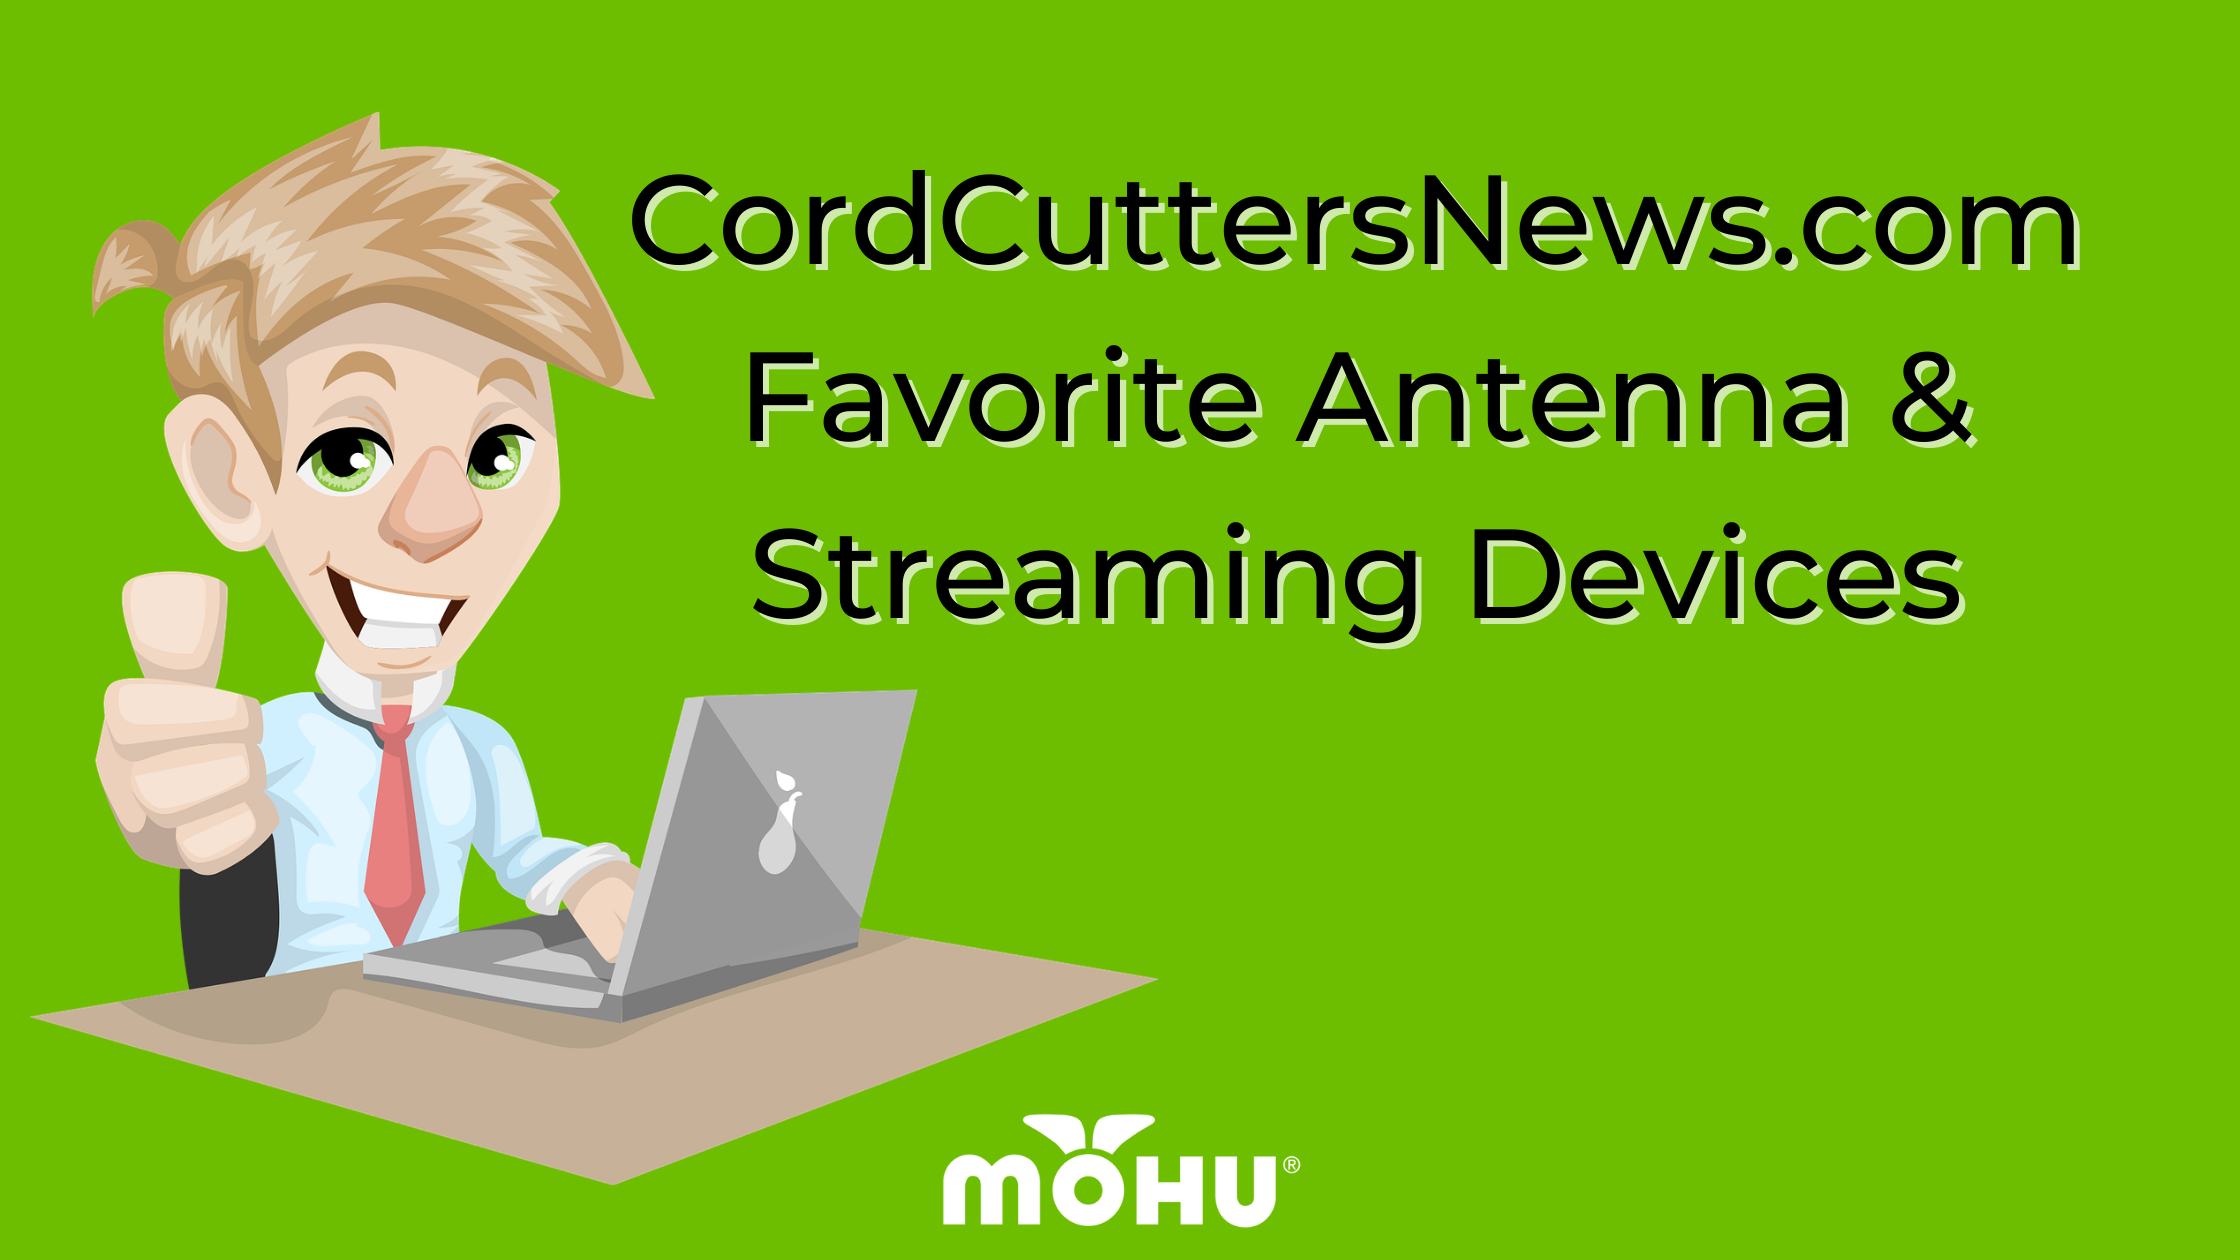 Cartoon man sitting in front of his computer giving a thumbs up, CordCuttersNews.com Favorite Antenna & Streaming Devices